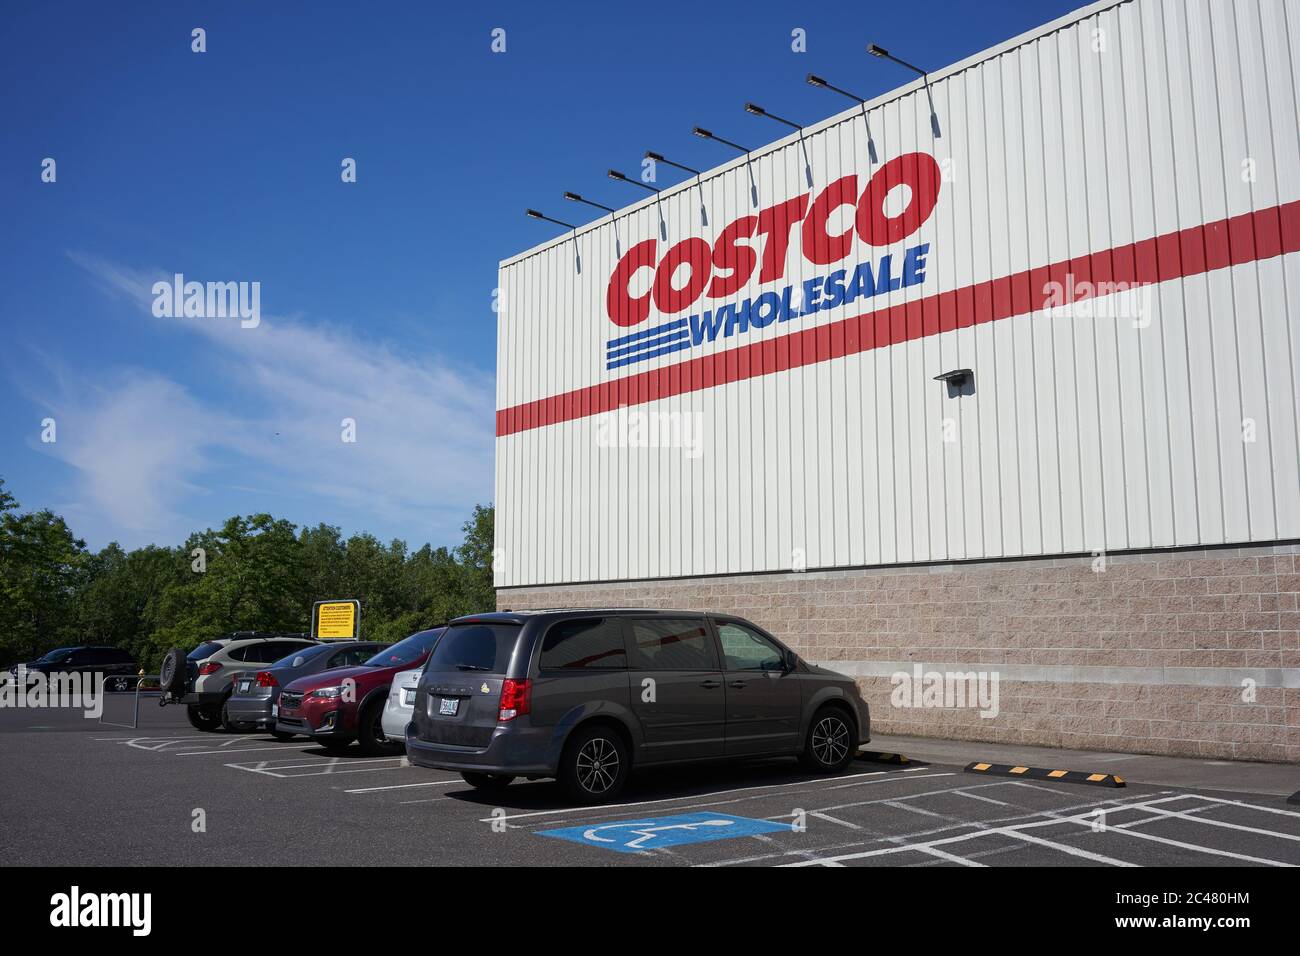 The Costco Wholesale store in Tigard, Oregon, seen on Tuesday, June 23, 2020. Stock Photo